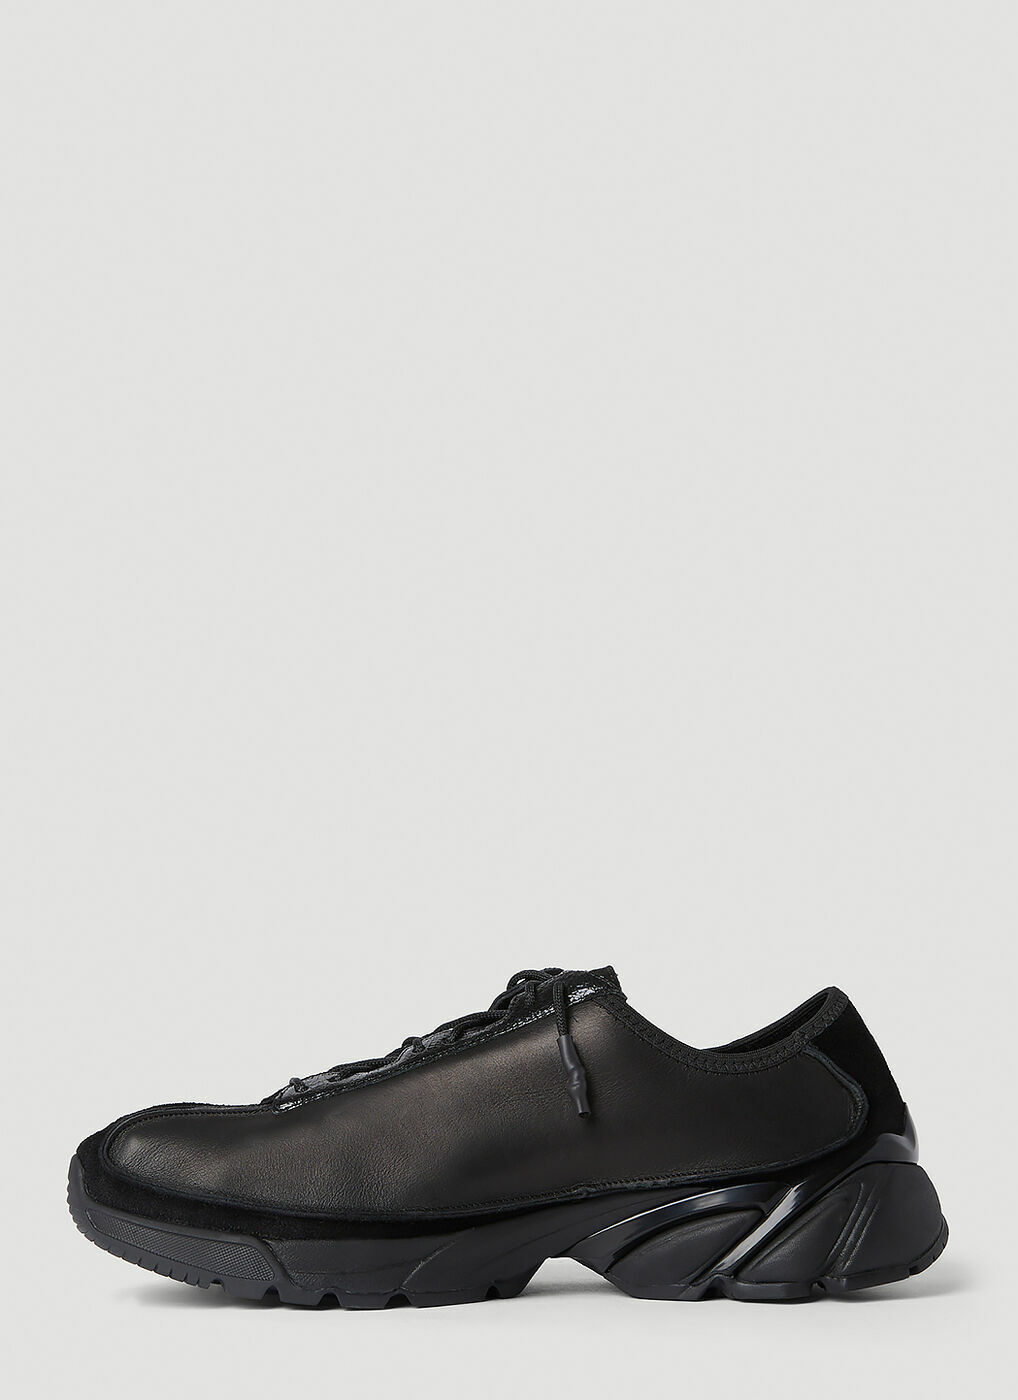 Our Legacy - Klove Sneakers in Black Our Legacy